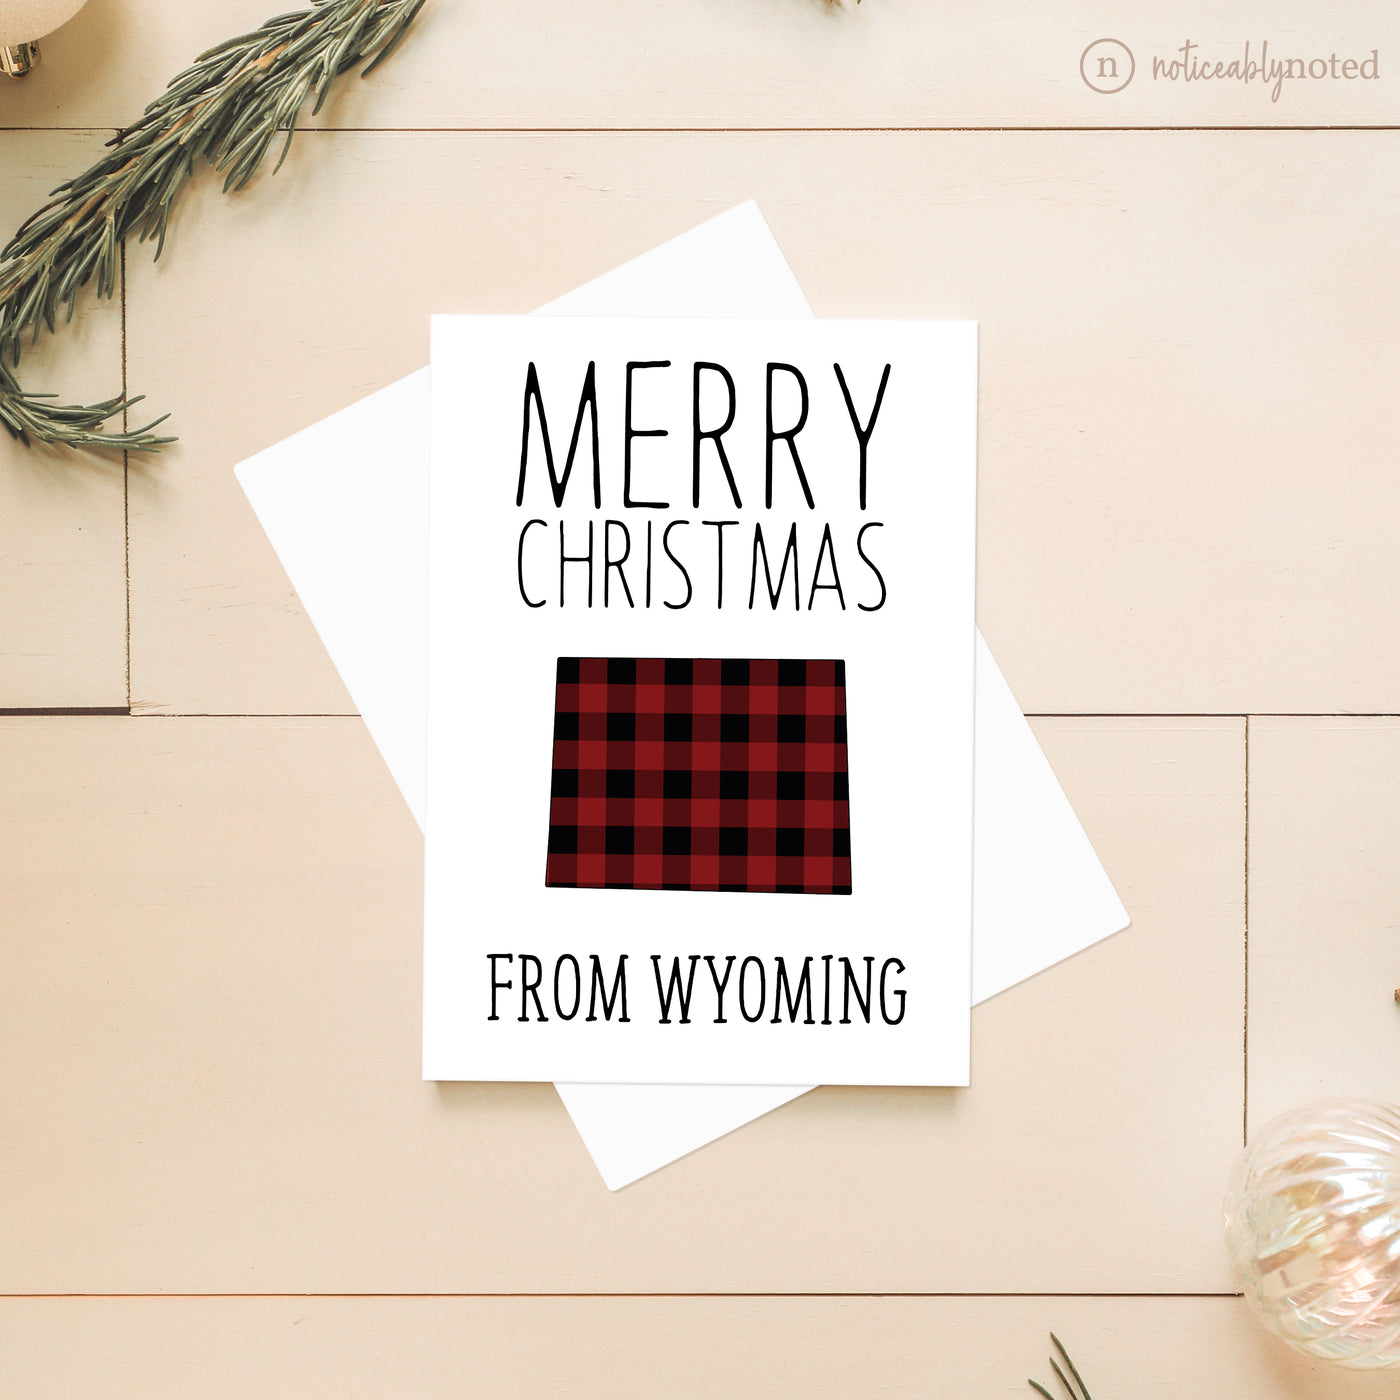 Wyoming Holiday Card - Merry Christmas | Noticeably Noted